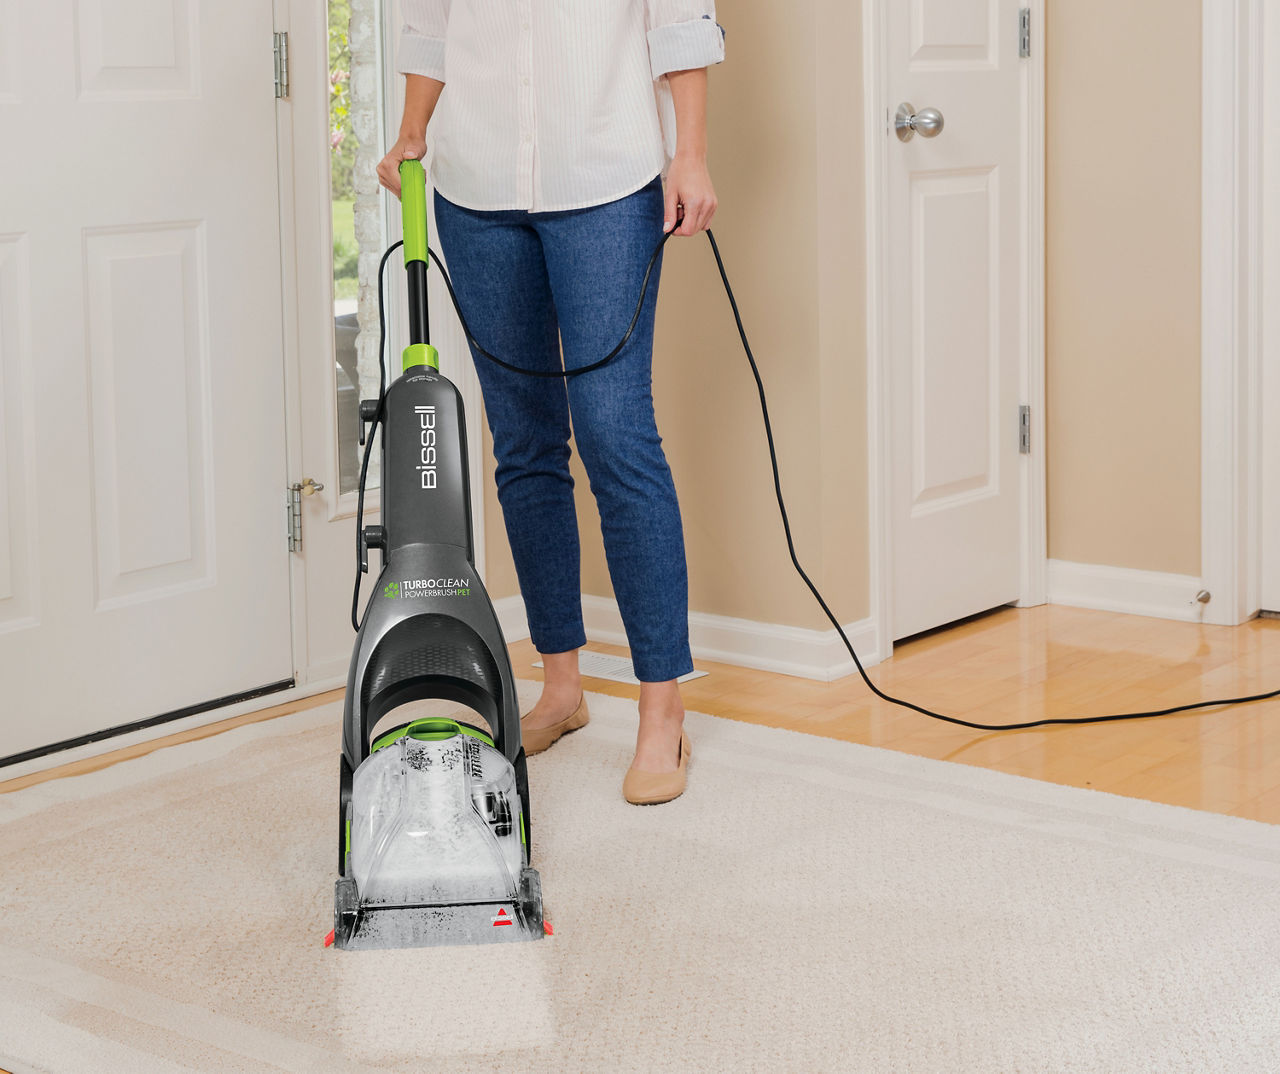 BISSELL TurboClean PowerBrush Pet Carpet Cleaner in the Carpet Cleaners  department at